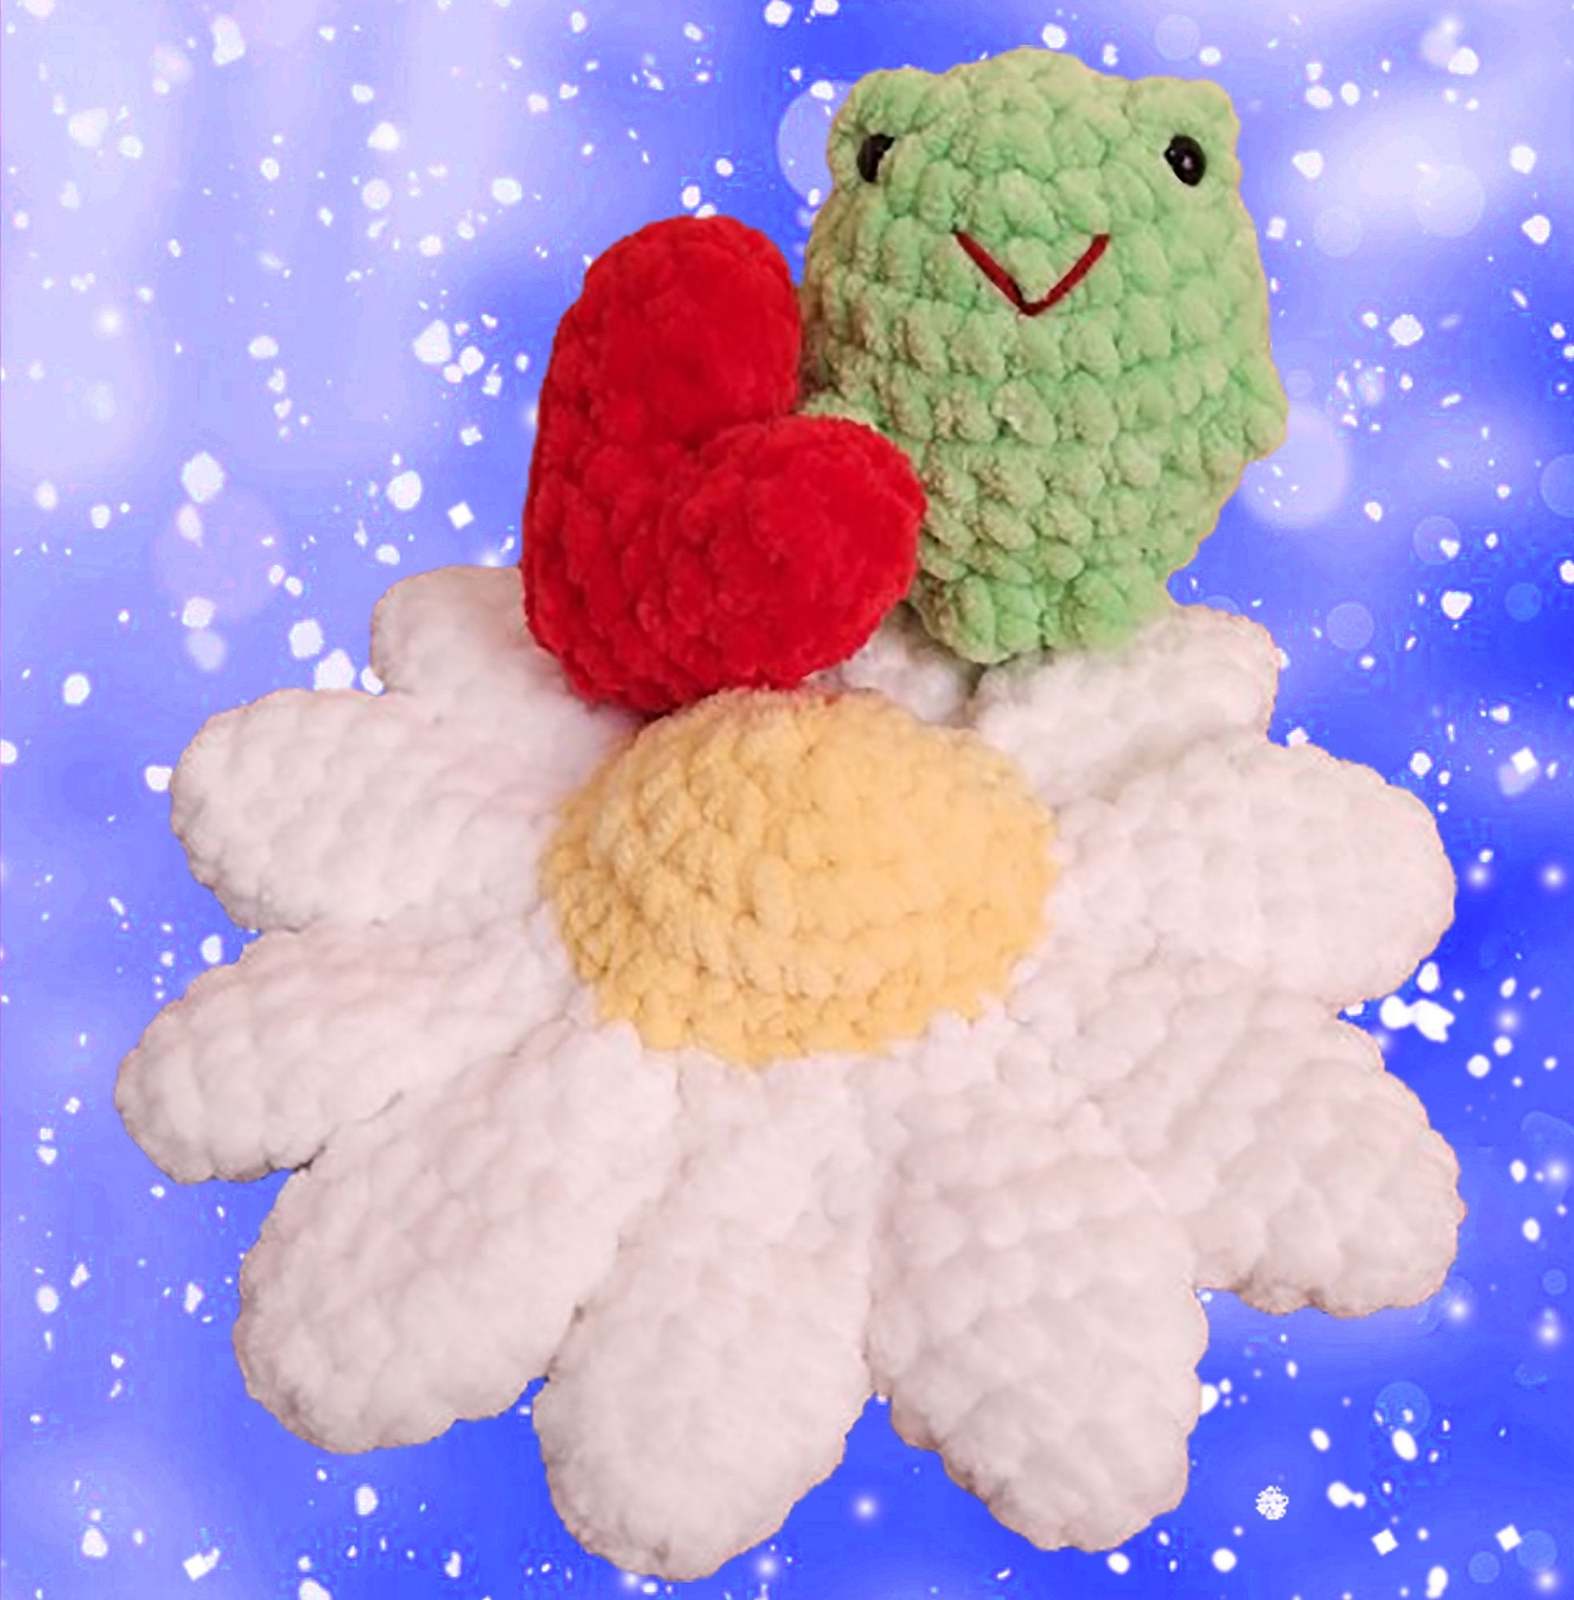 Crochet plusie Prince Frog, Height 3.54 inch/9cm, Special Valentine Prince Frog - $22.00